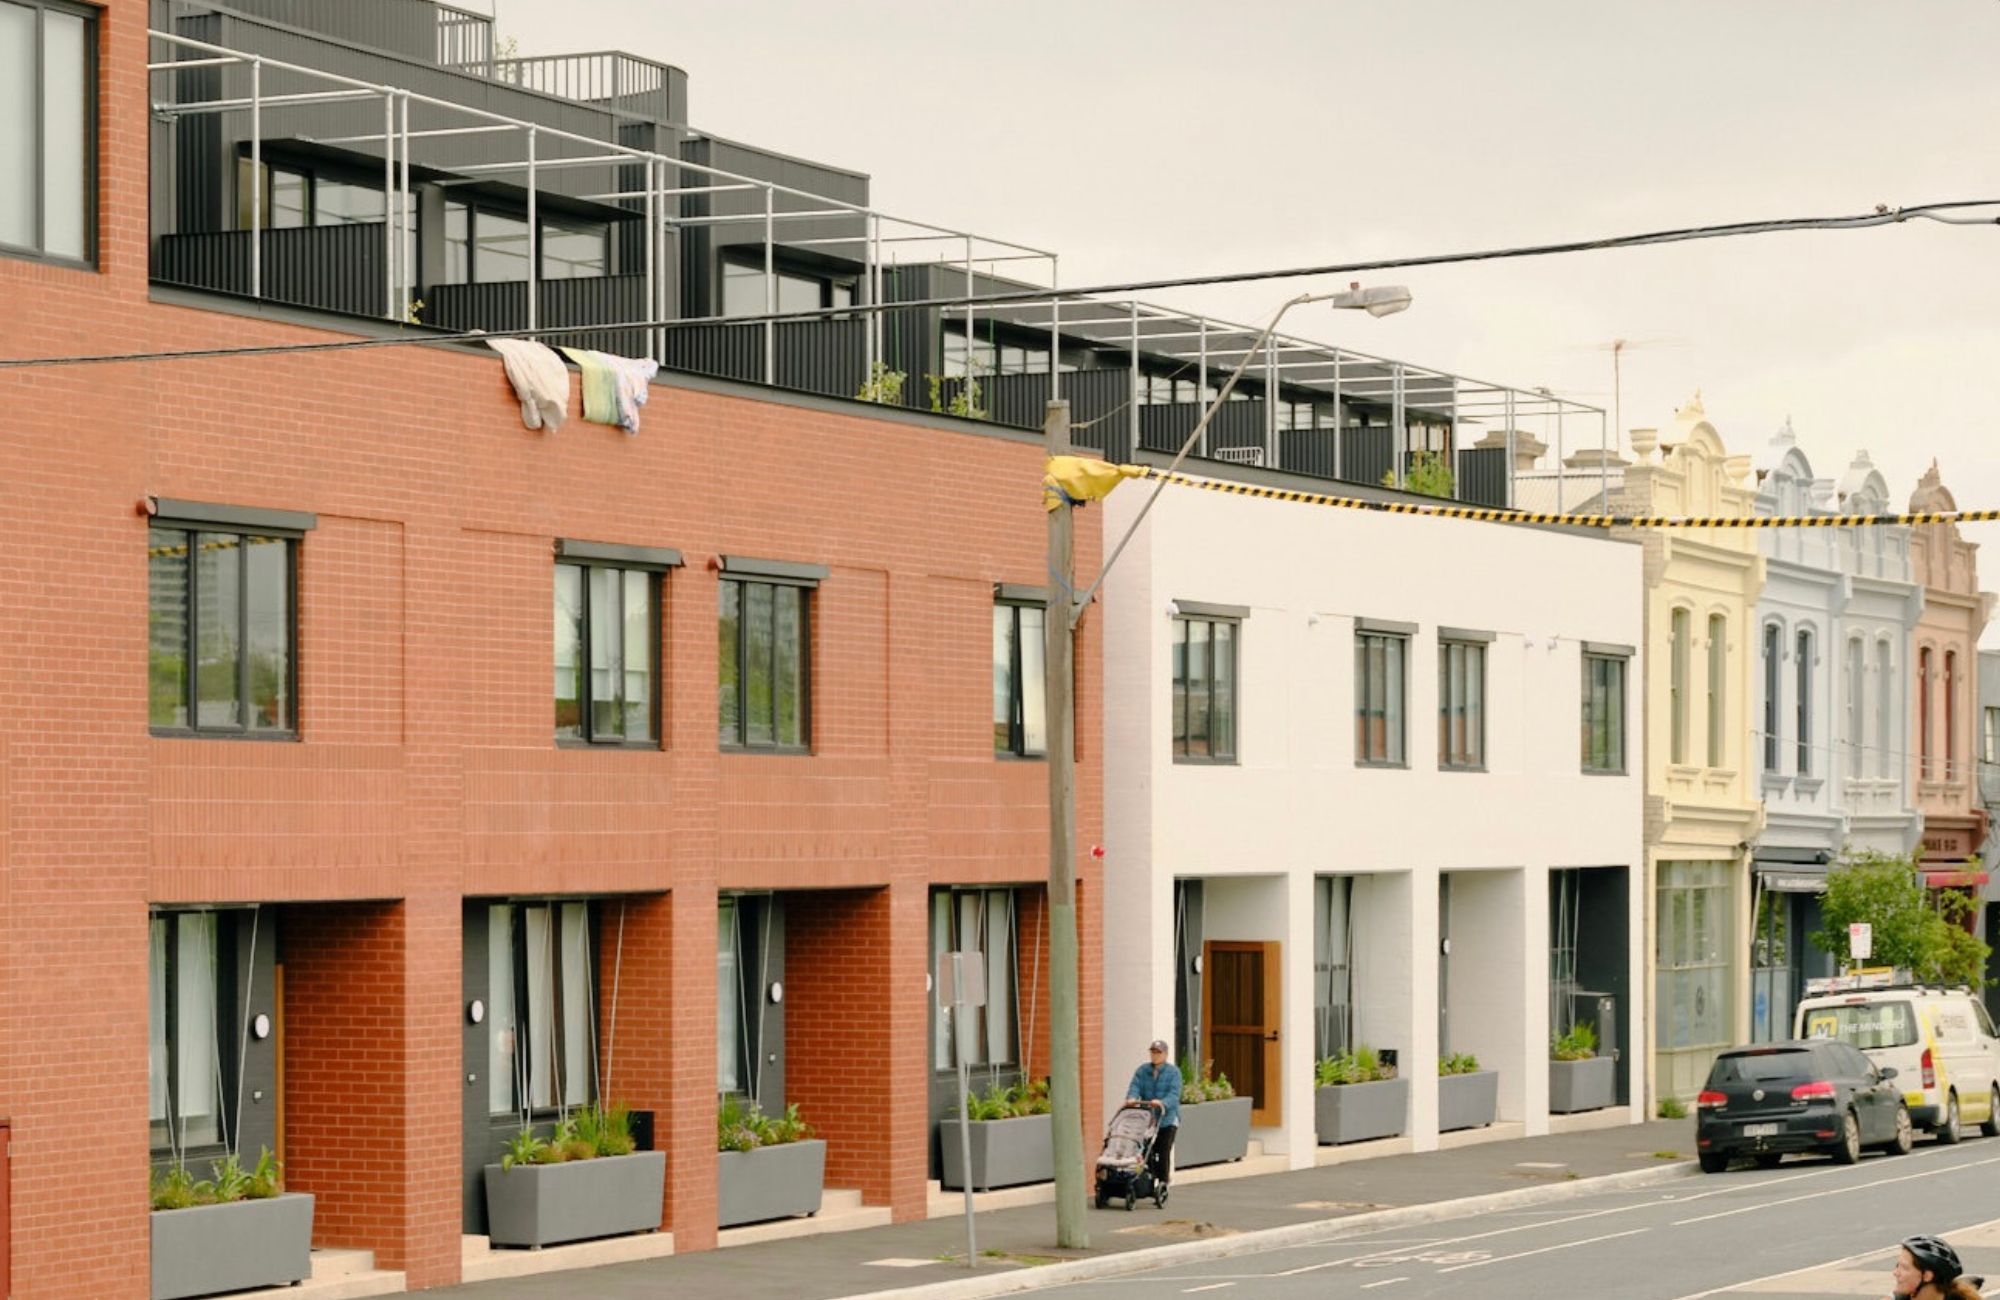 Inkerman & Nelson by MAA showing external facade of the brick building